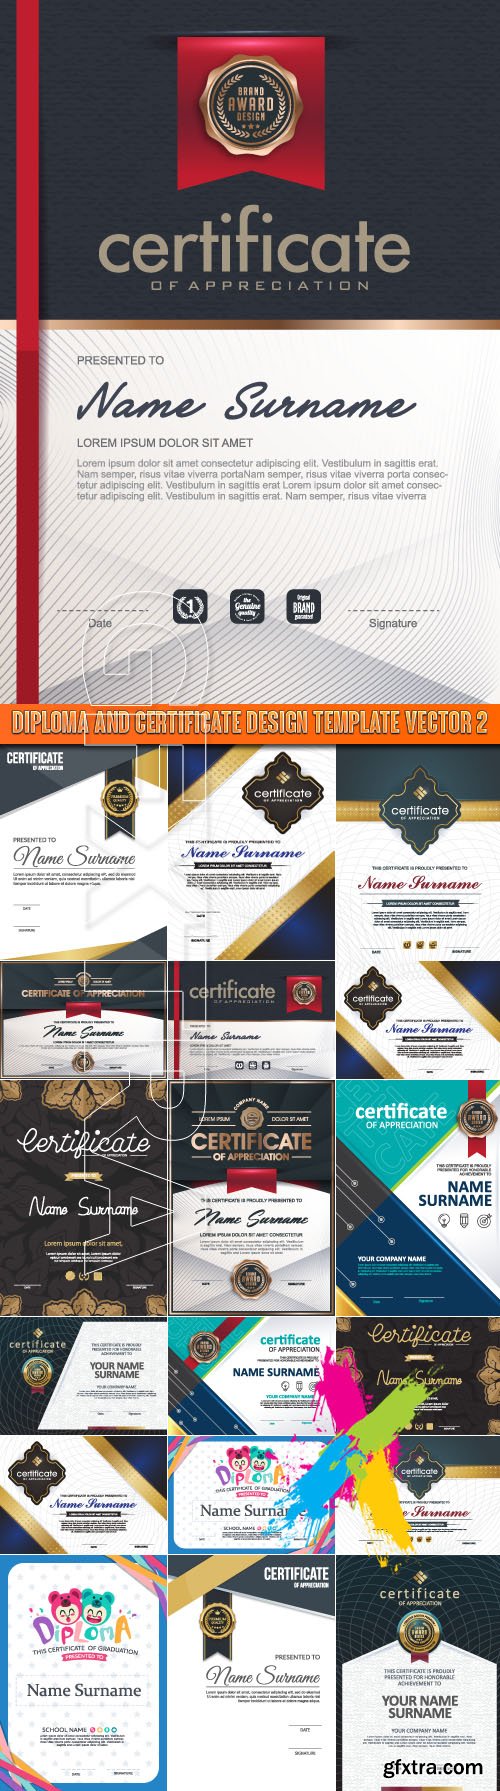 Diploma and certificate design template vector 2